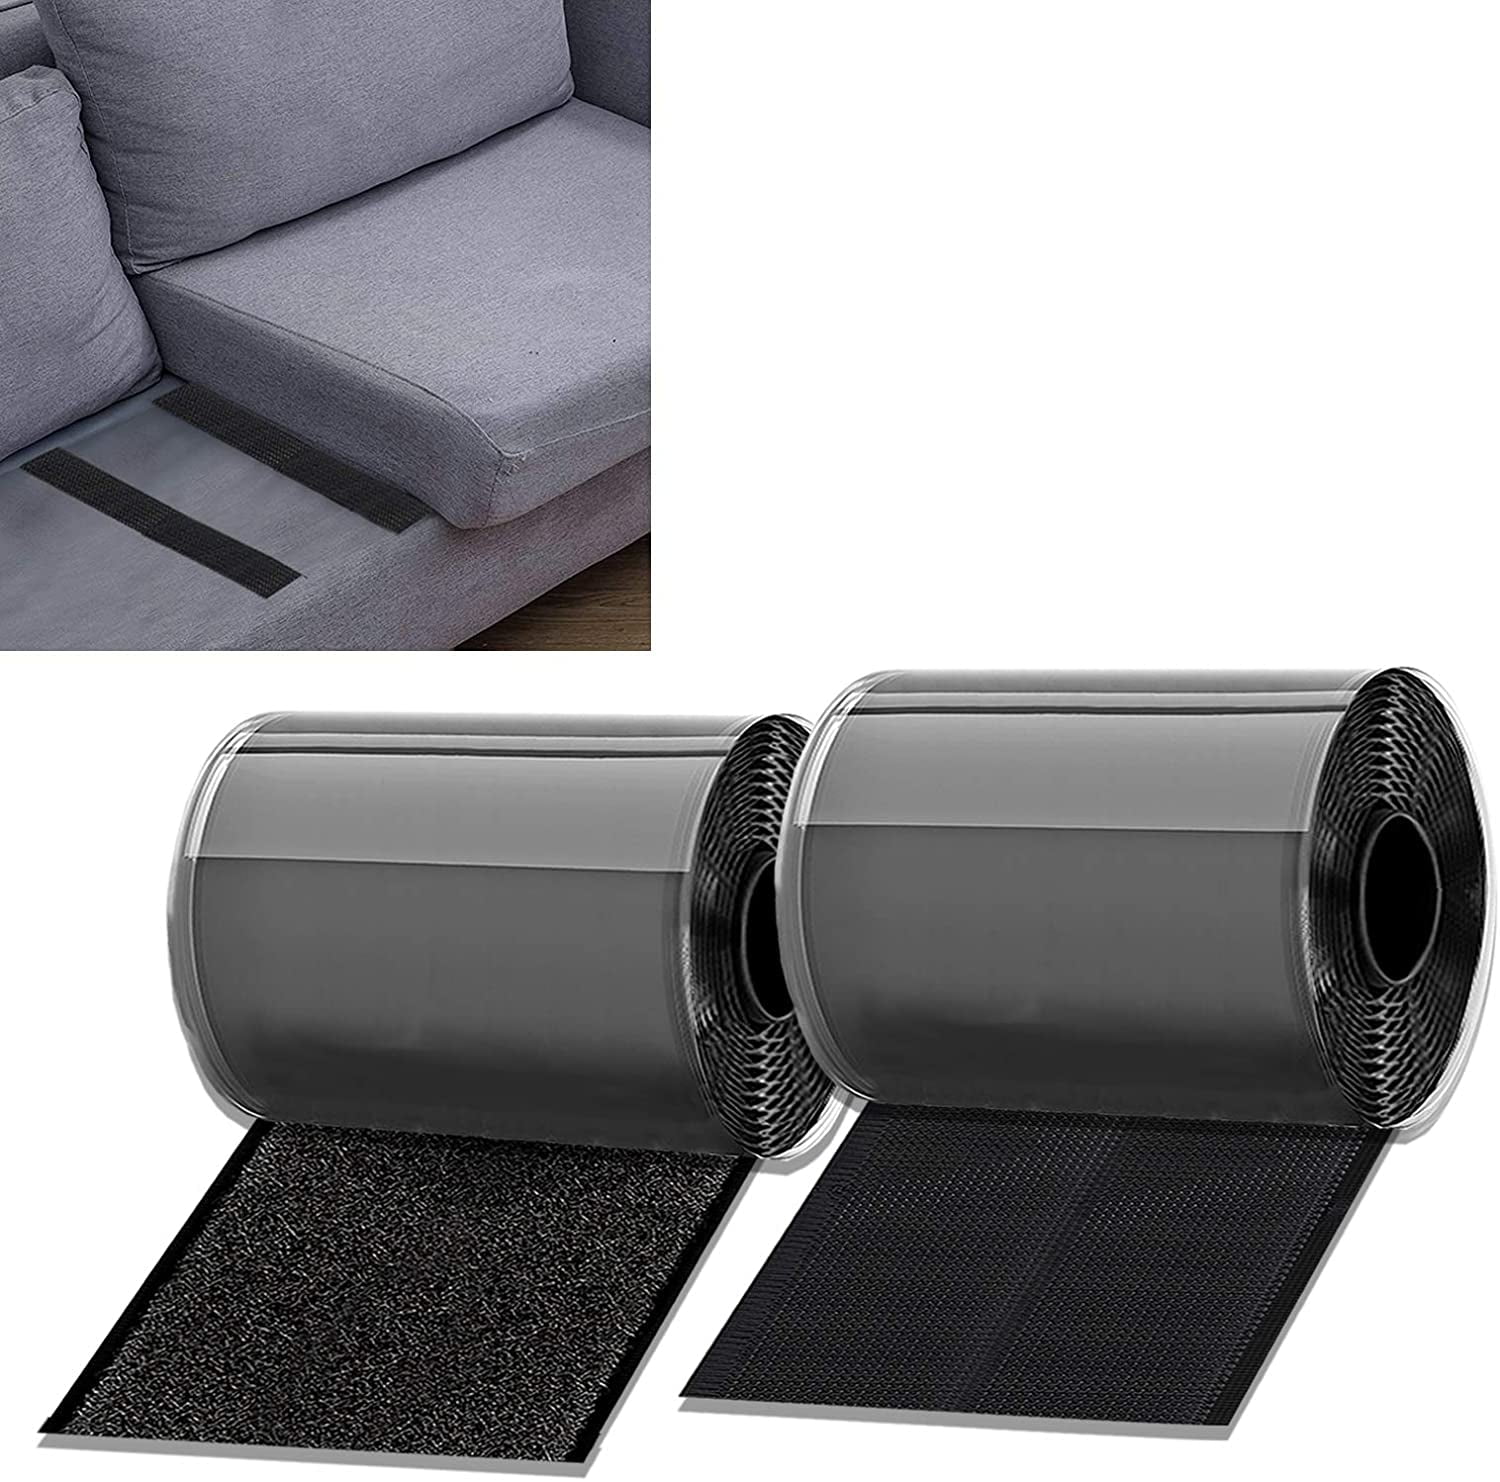 Nevlers Couch Cushion Grip Pad - Keep Couch Cushions from Sliding